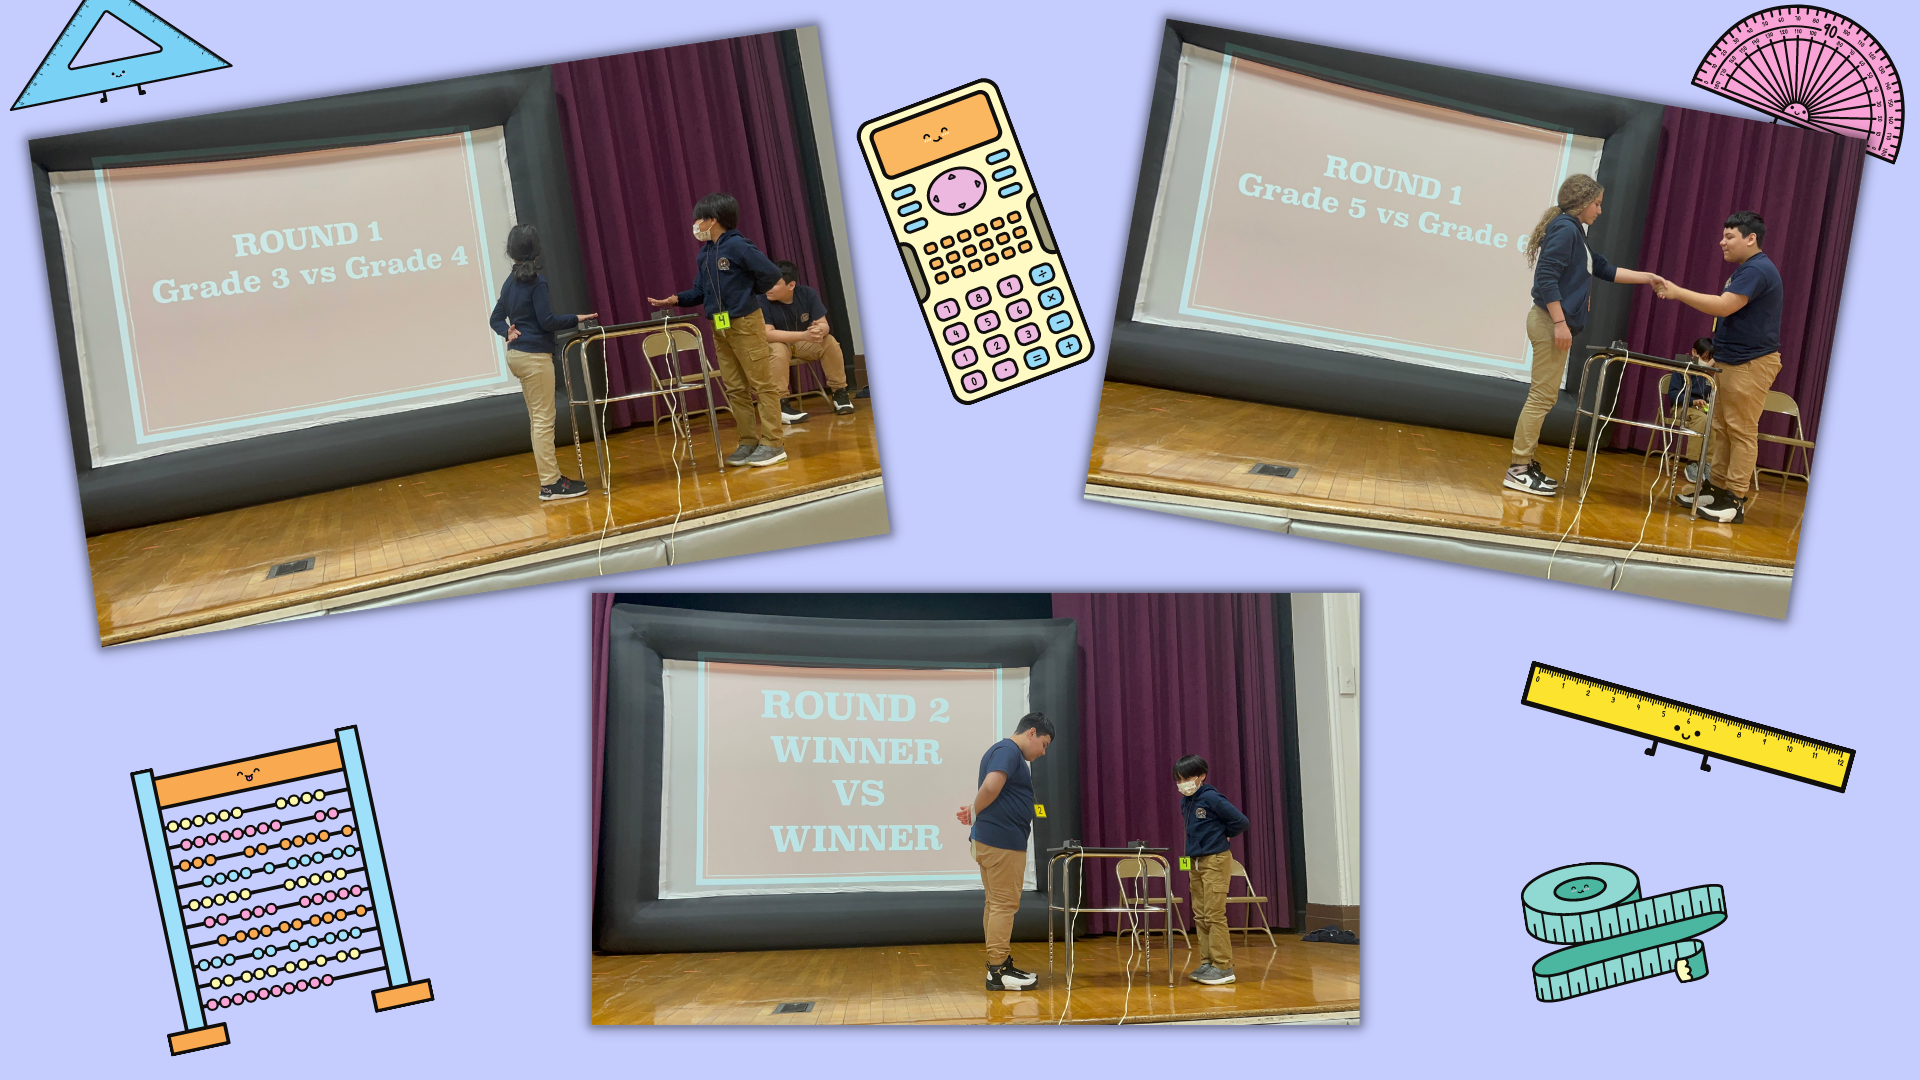 Another Exciting Multiplication Drill Challenge-Roosevelt School